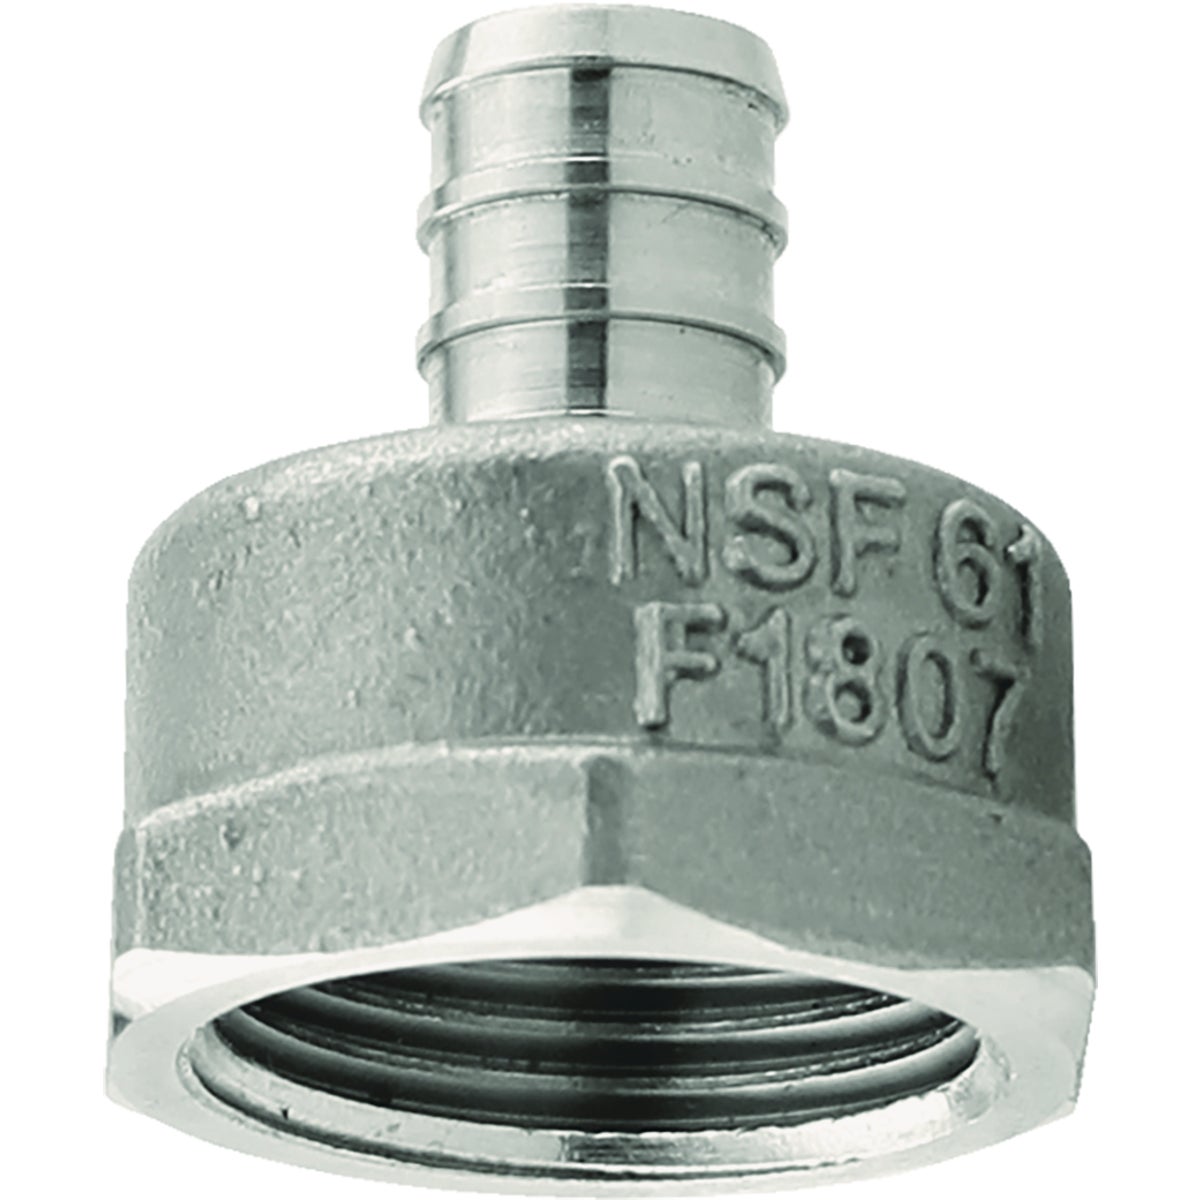 Plumbeez 1/2 In. x 3/4 In. FPT Stainless Steel PEX Adapter